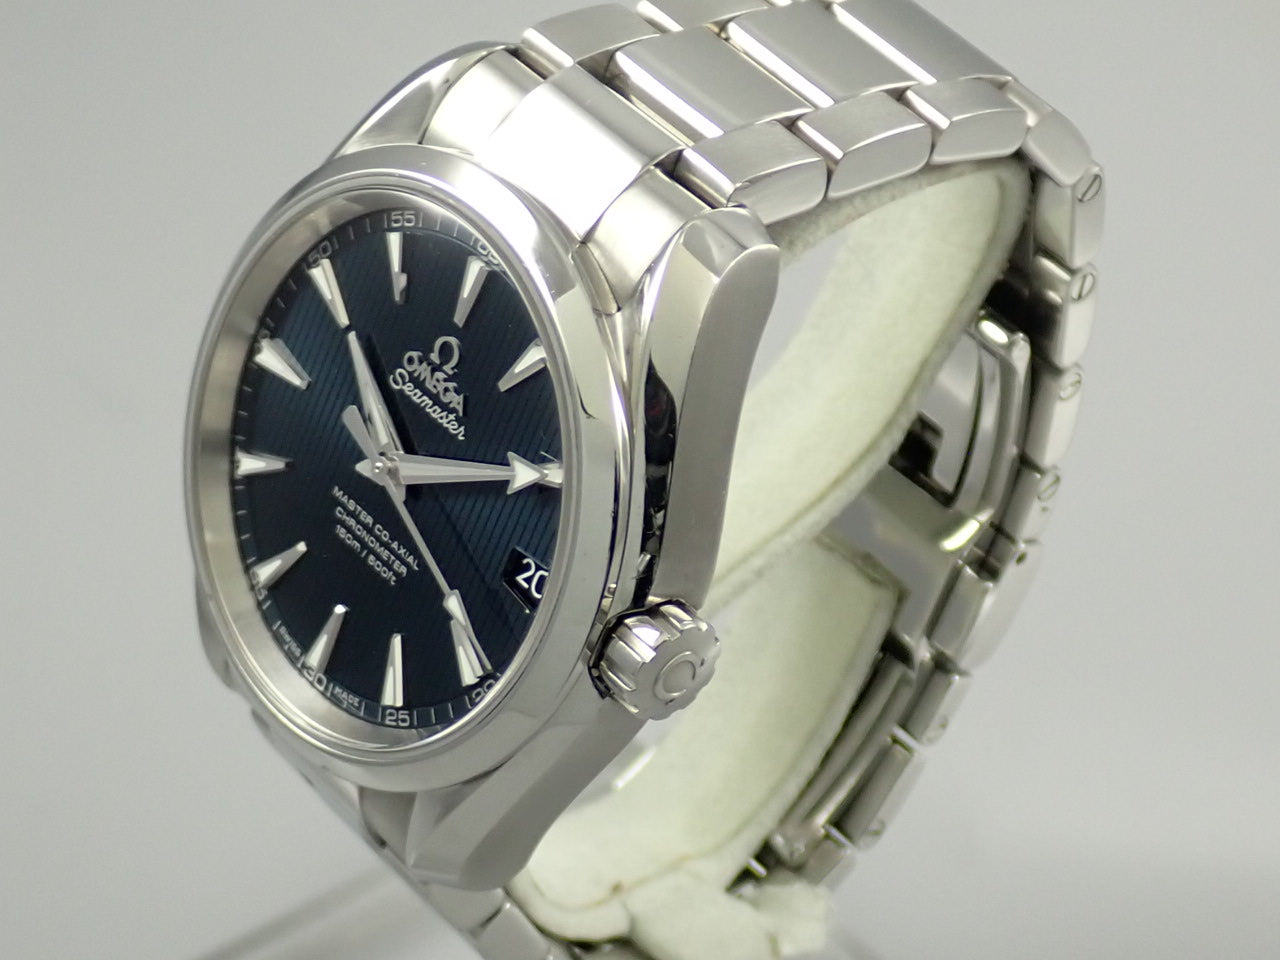 Omega Seamaster Aqua Terra Master Co-Axial Chronometer &lt;Warranty Box and Others&gt;